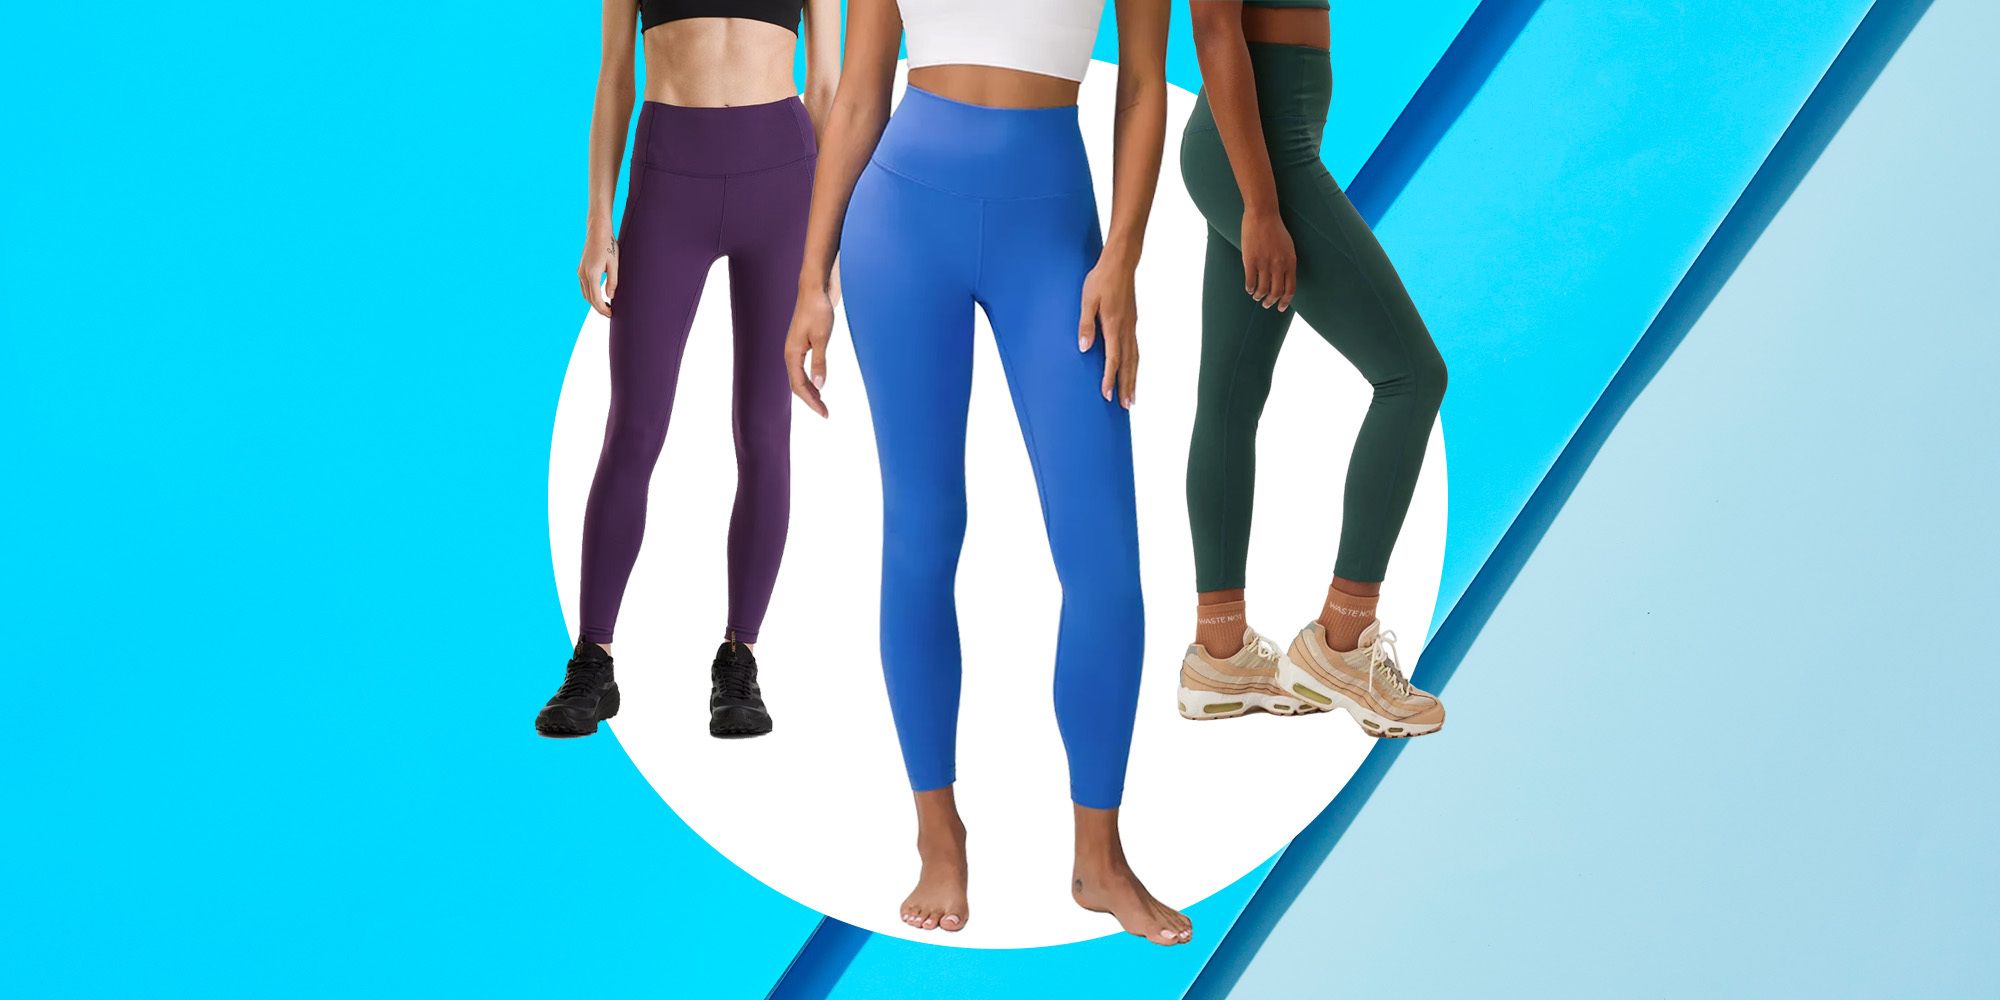 High Waist Tie Dye Tie Dye Gym Leggings For Women Perfect For Fitness, Yoga,  And Gym Workouts From Mu03, $11.36 | DHgate.Com